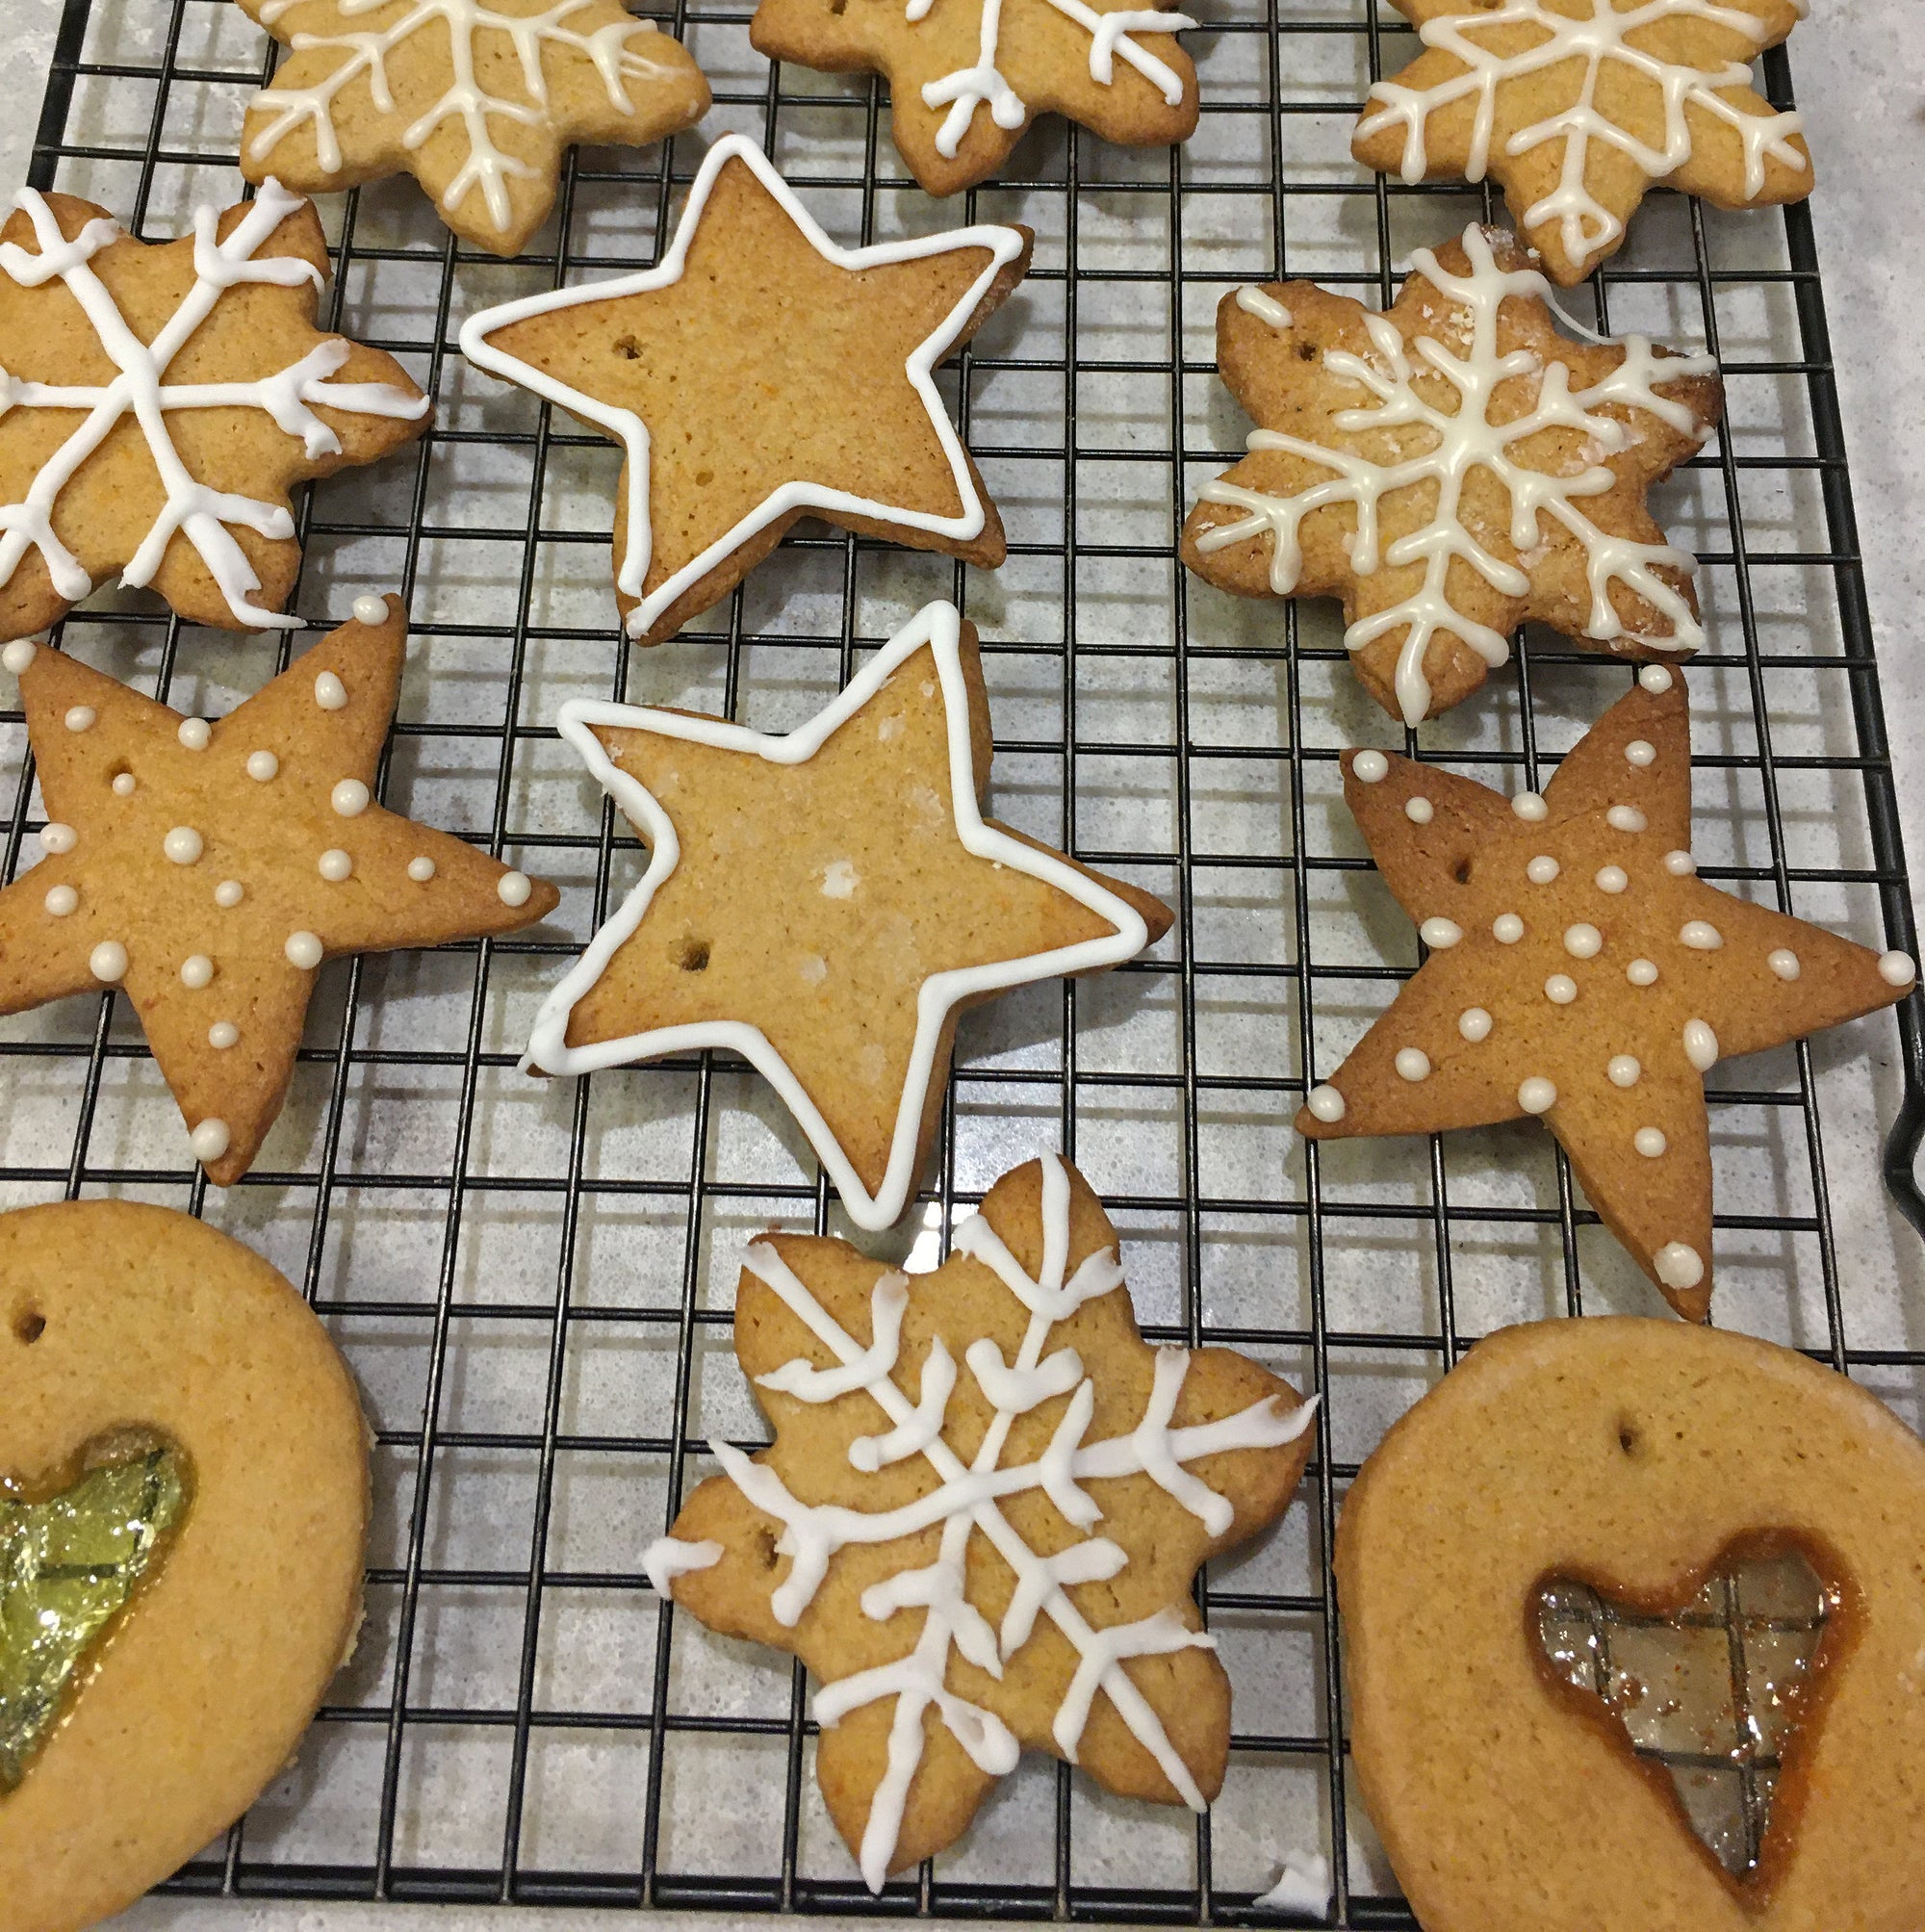 Crunchy Christmas Decorative Biscuits!